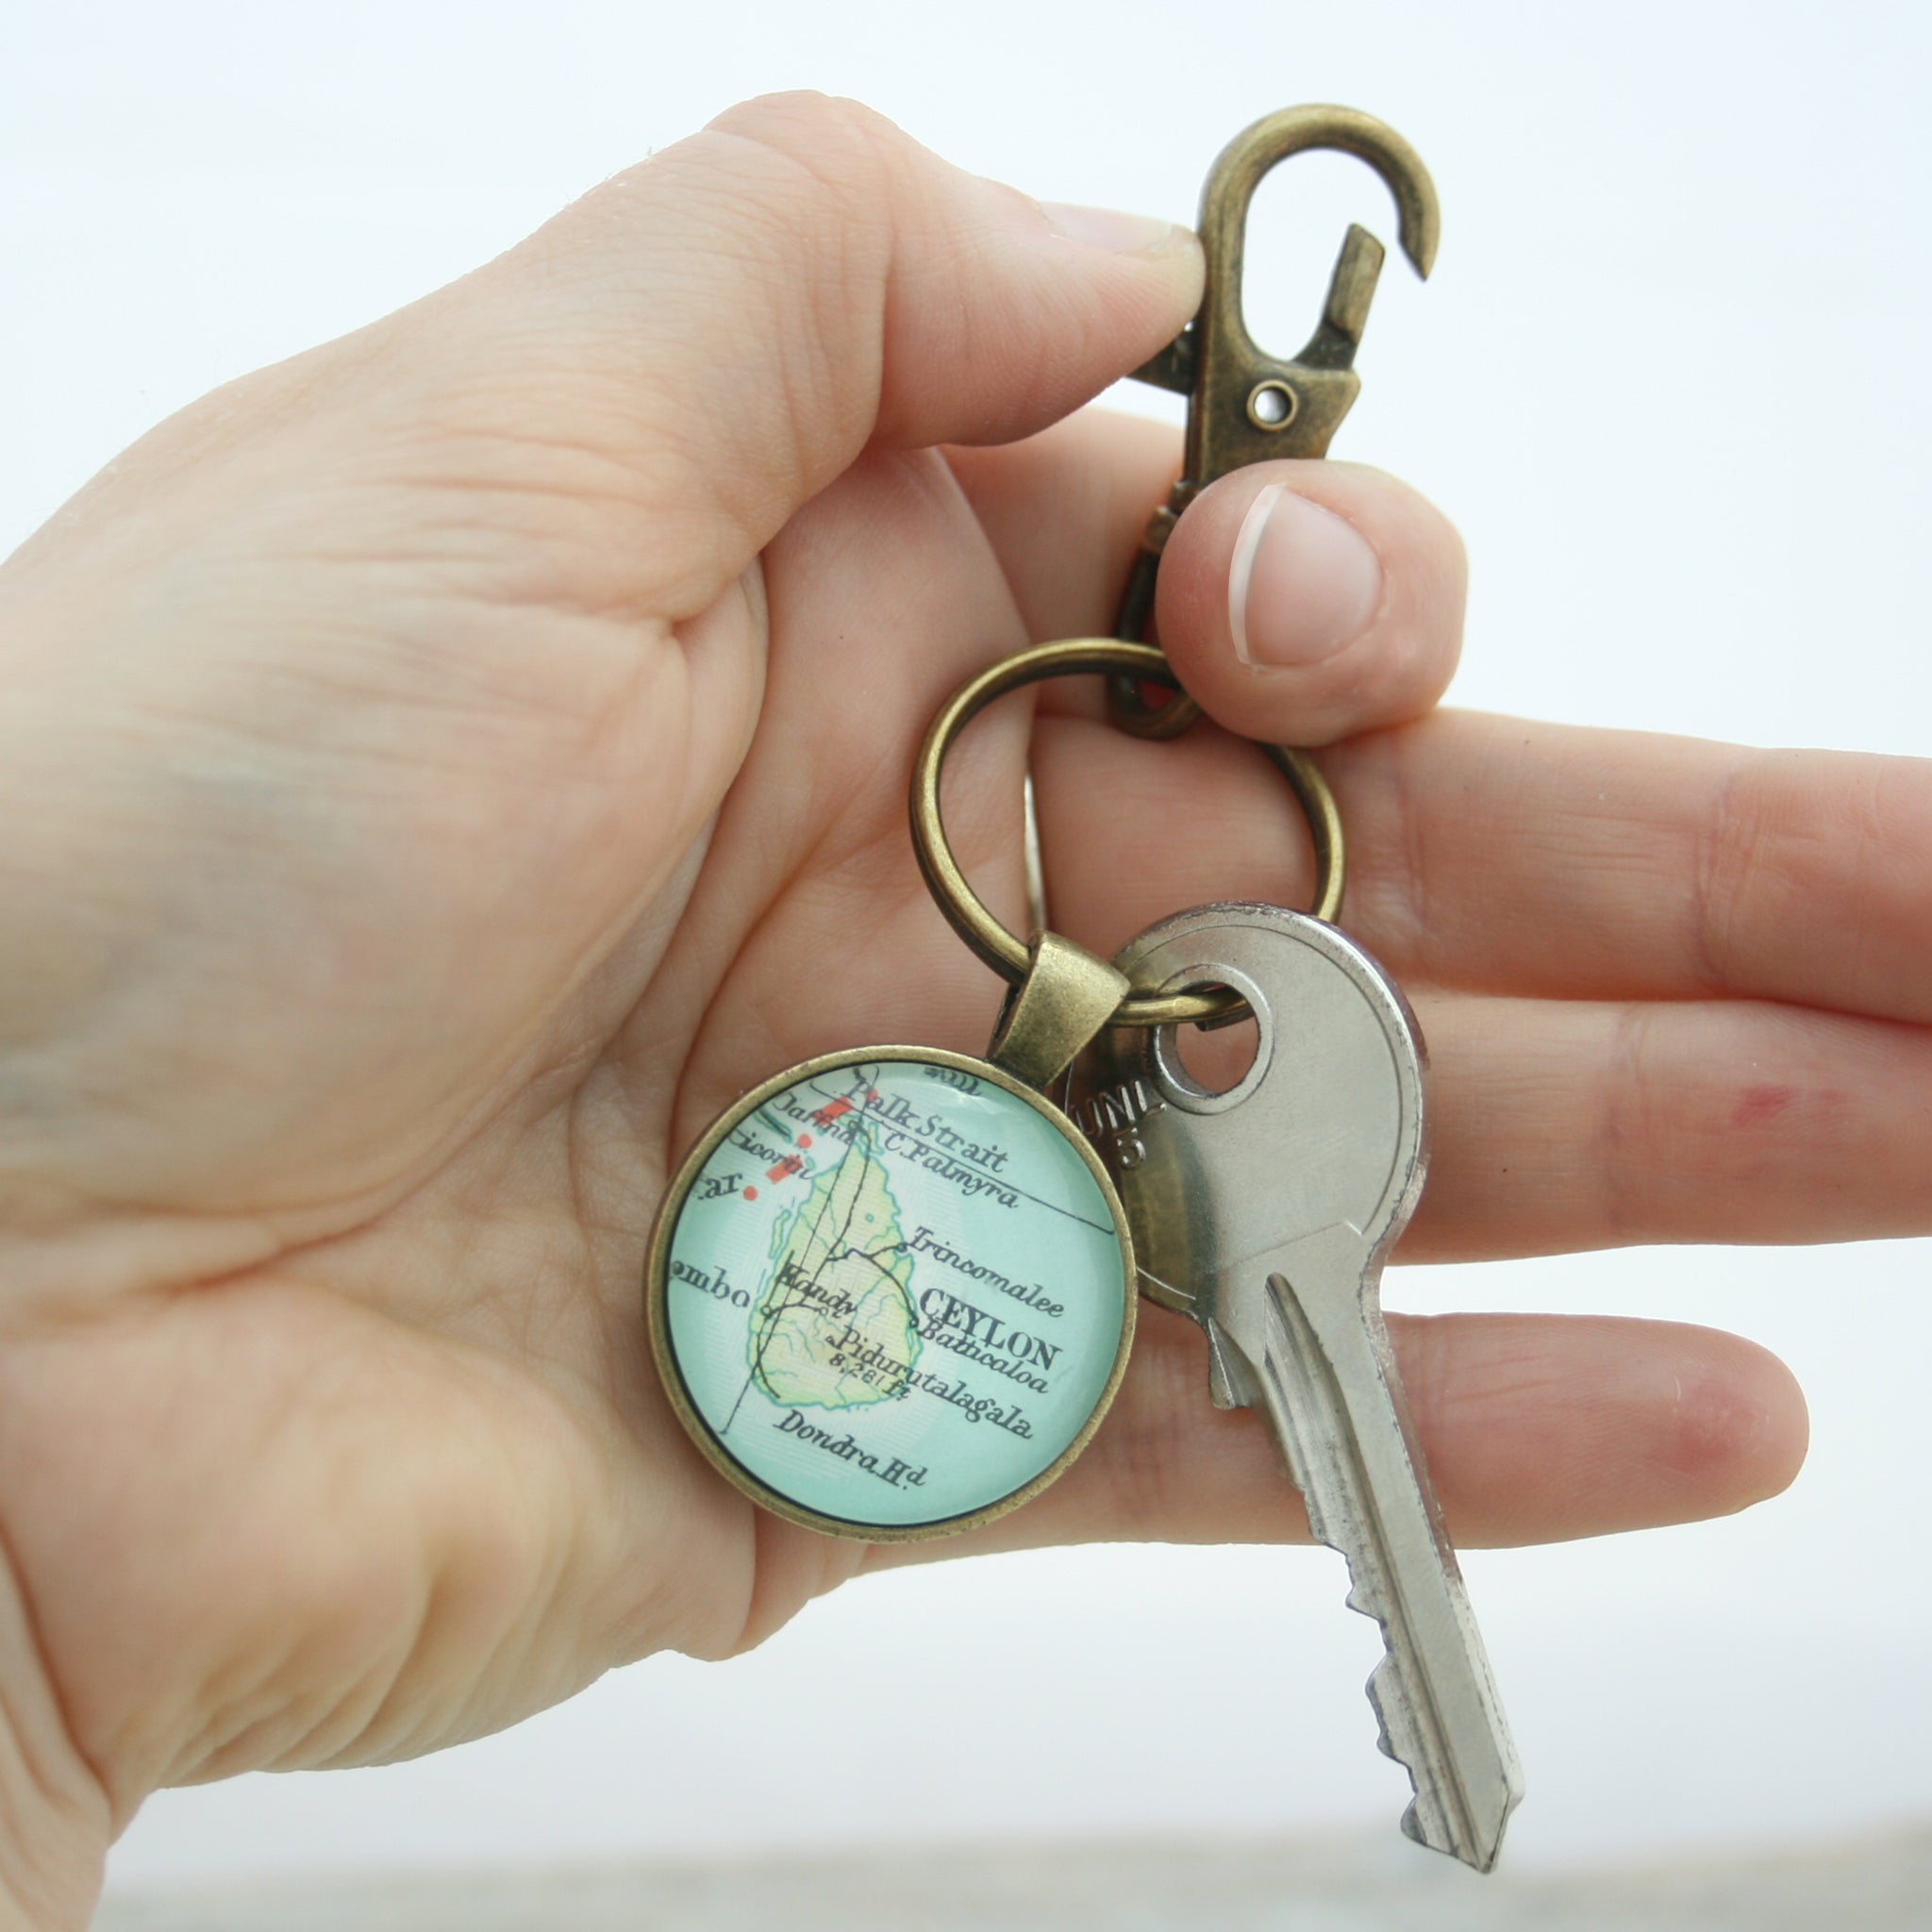 Hold in hand Personalised Keyring in bronze color featuring map of Ceylon